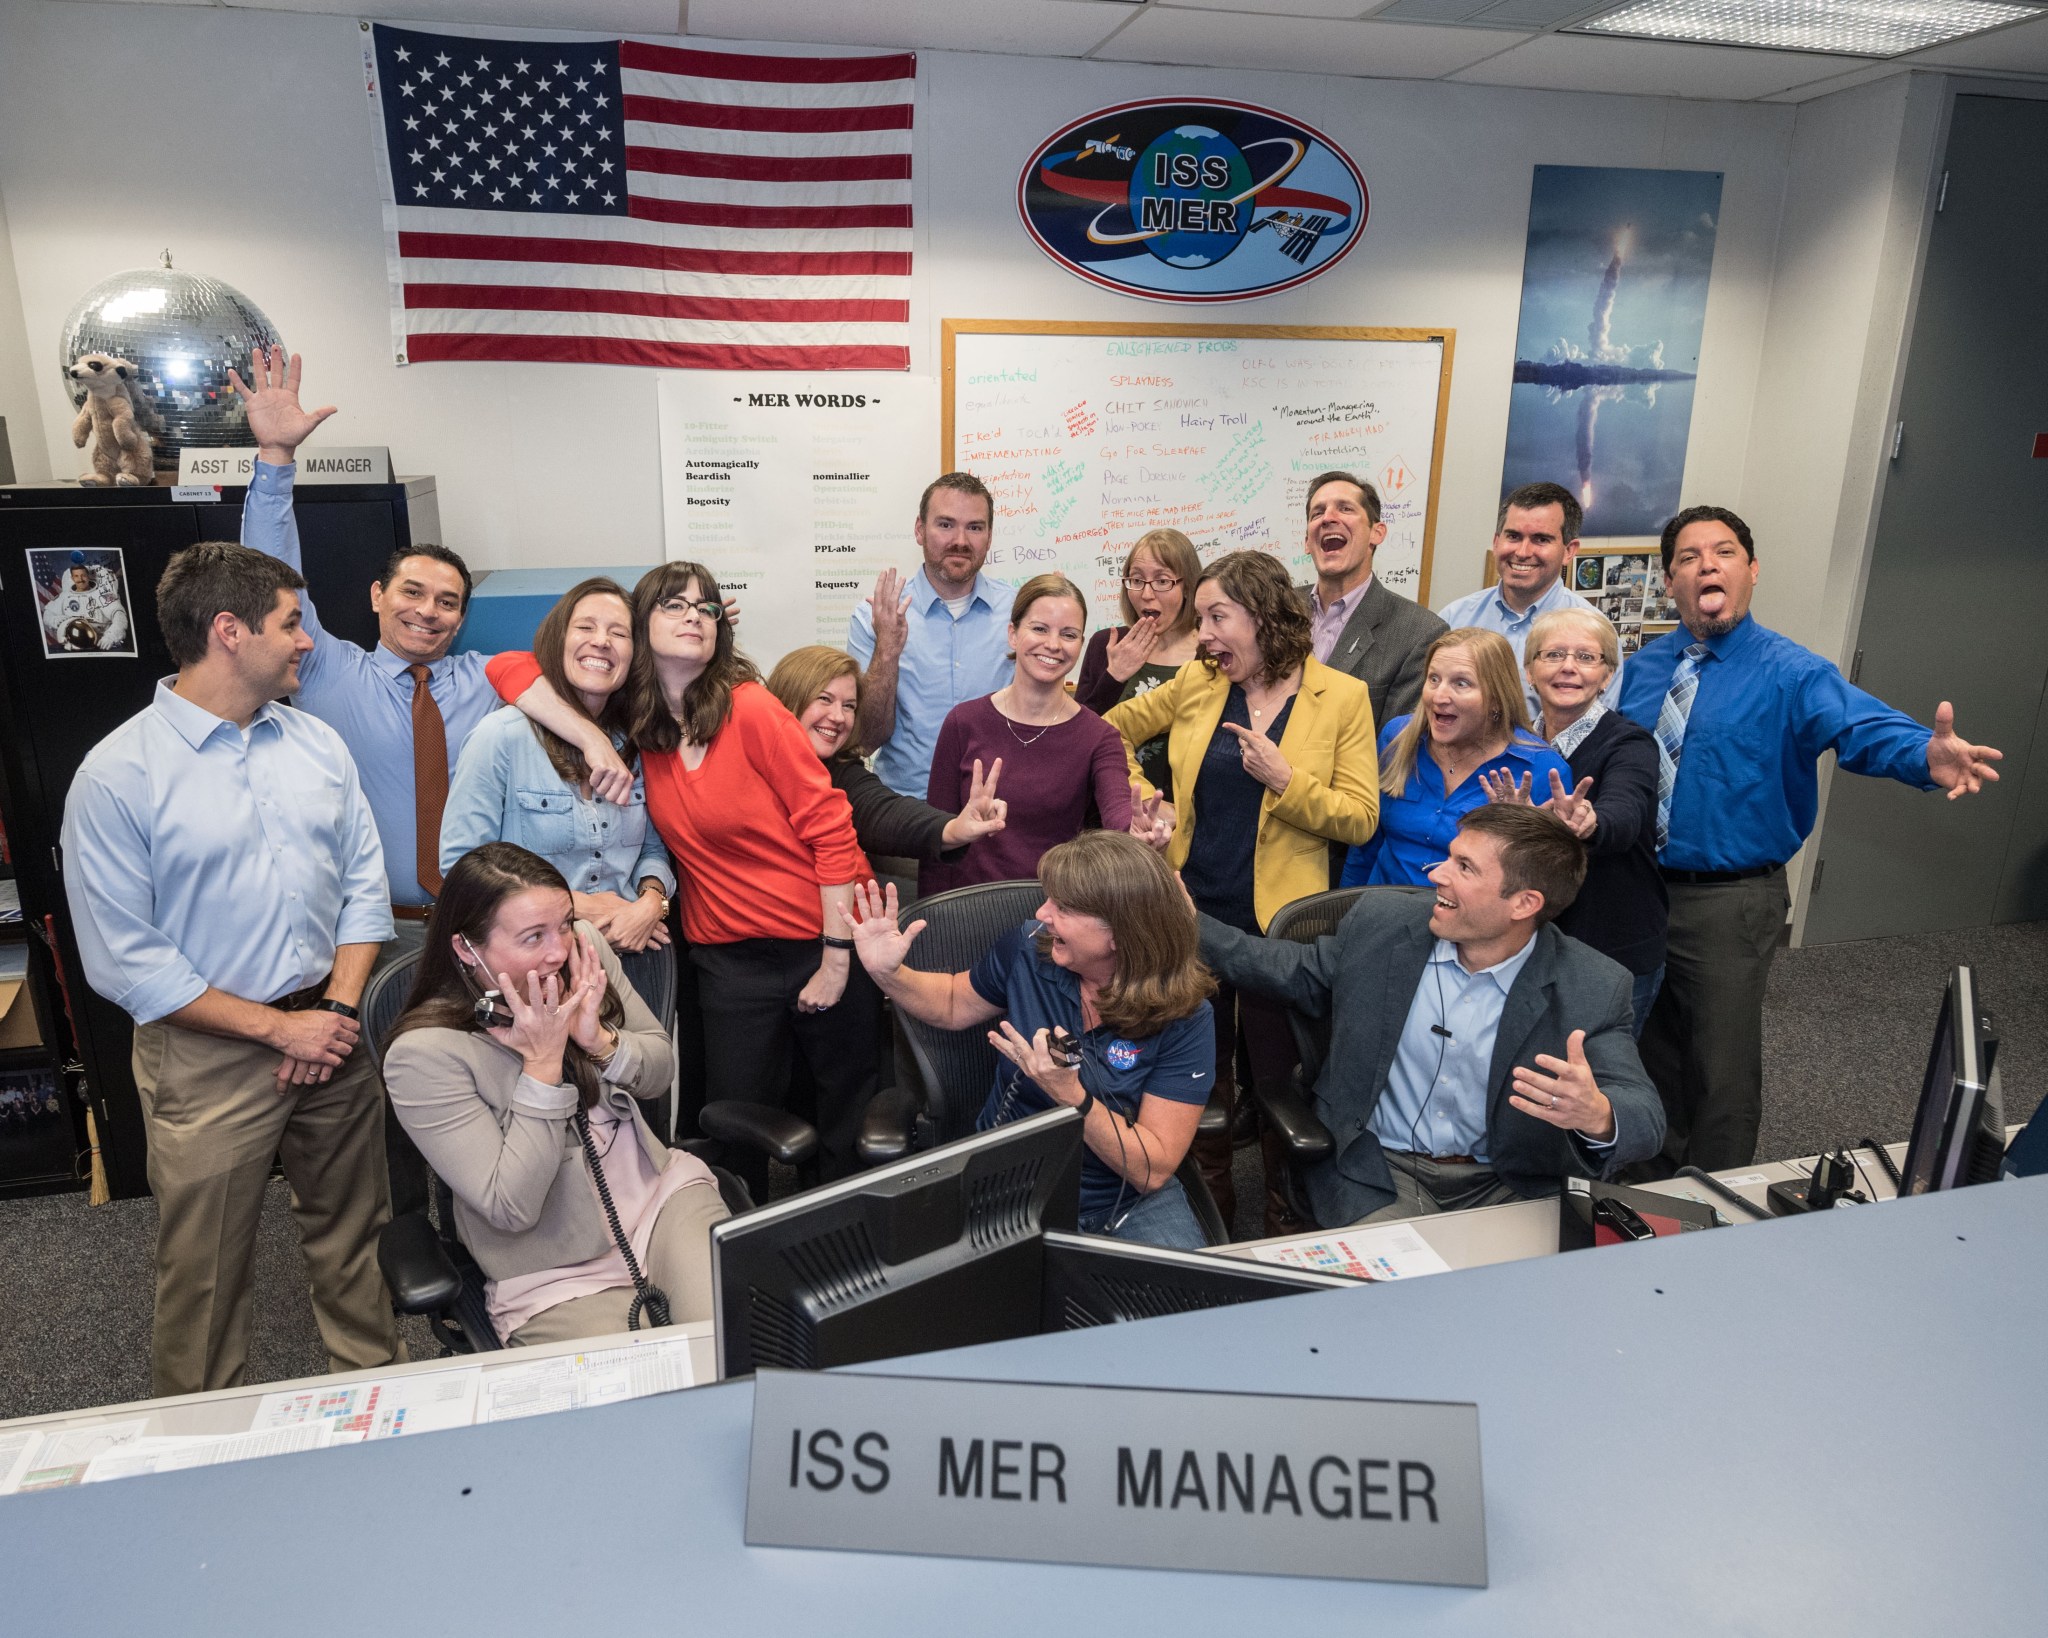 A group of 17 men and women strike silly poses while sitting behind a bank of computers labeled ISS MER Manager.